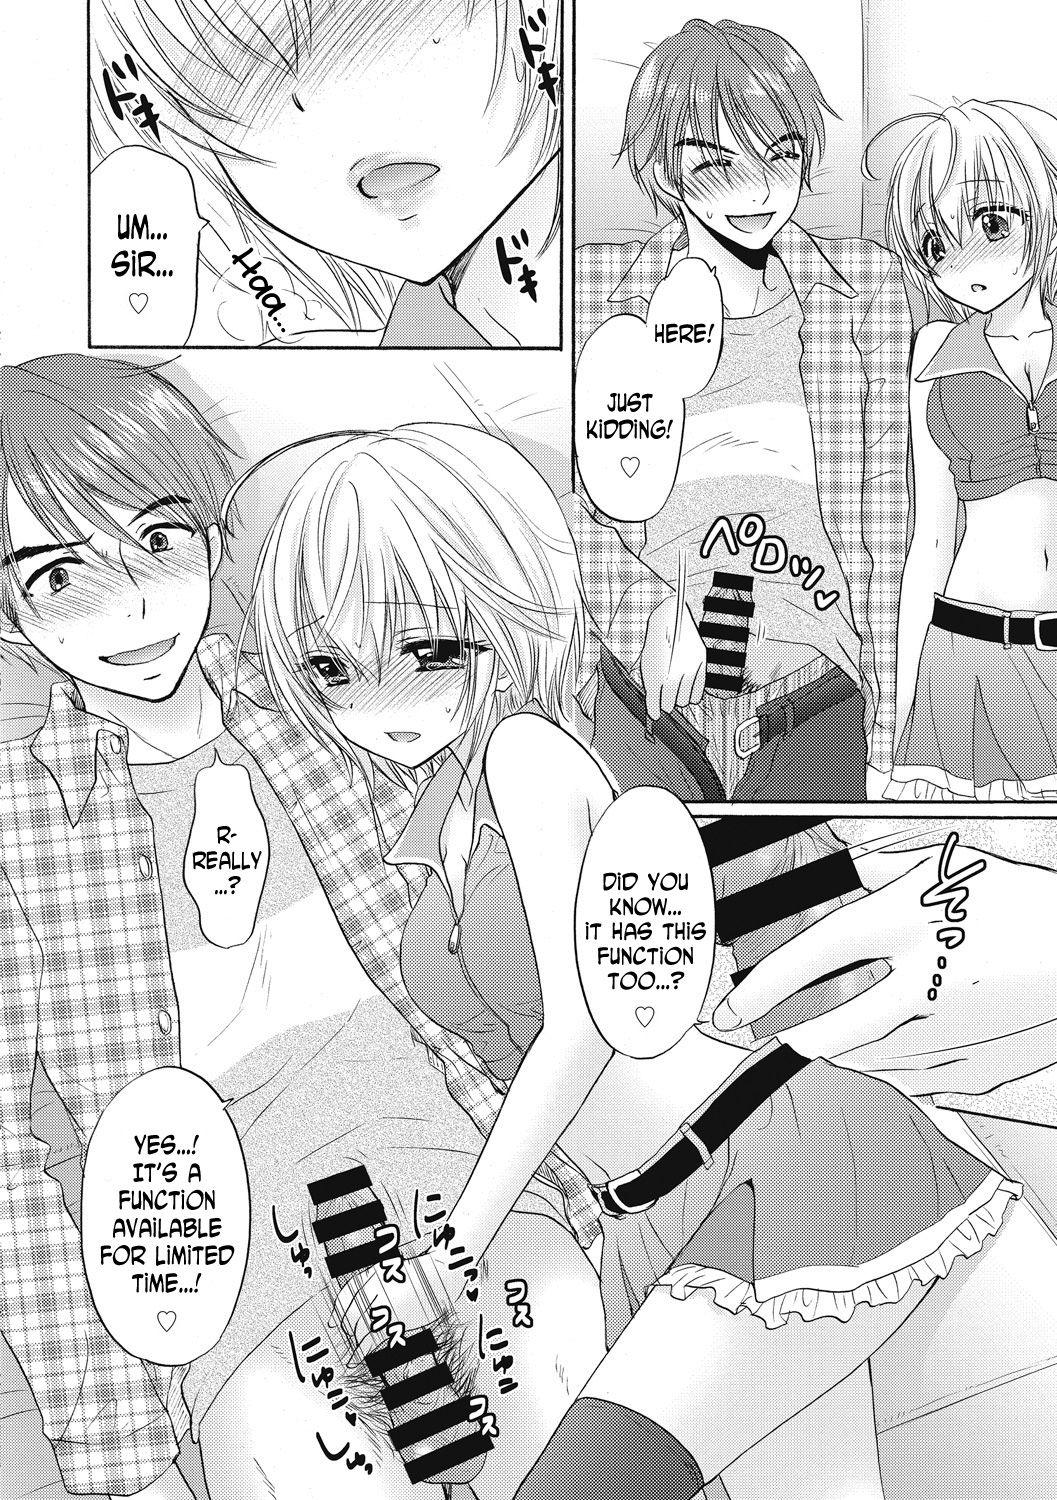 Assfingering Houkago Love Mode 10 Oldvsyoung - Page 6